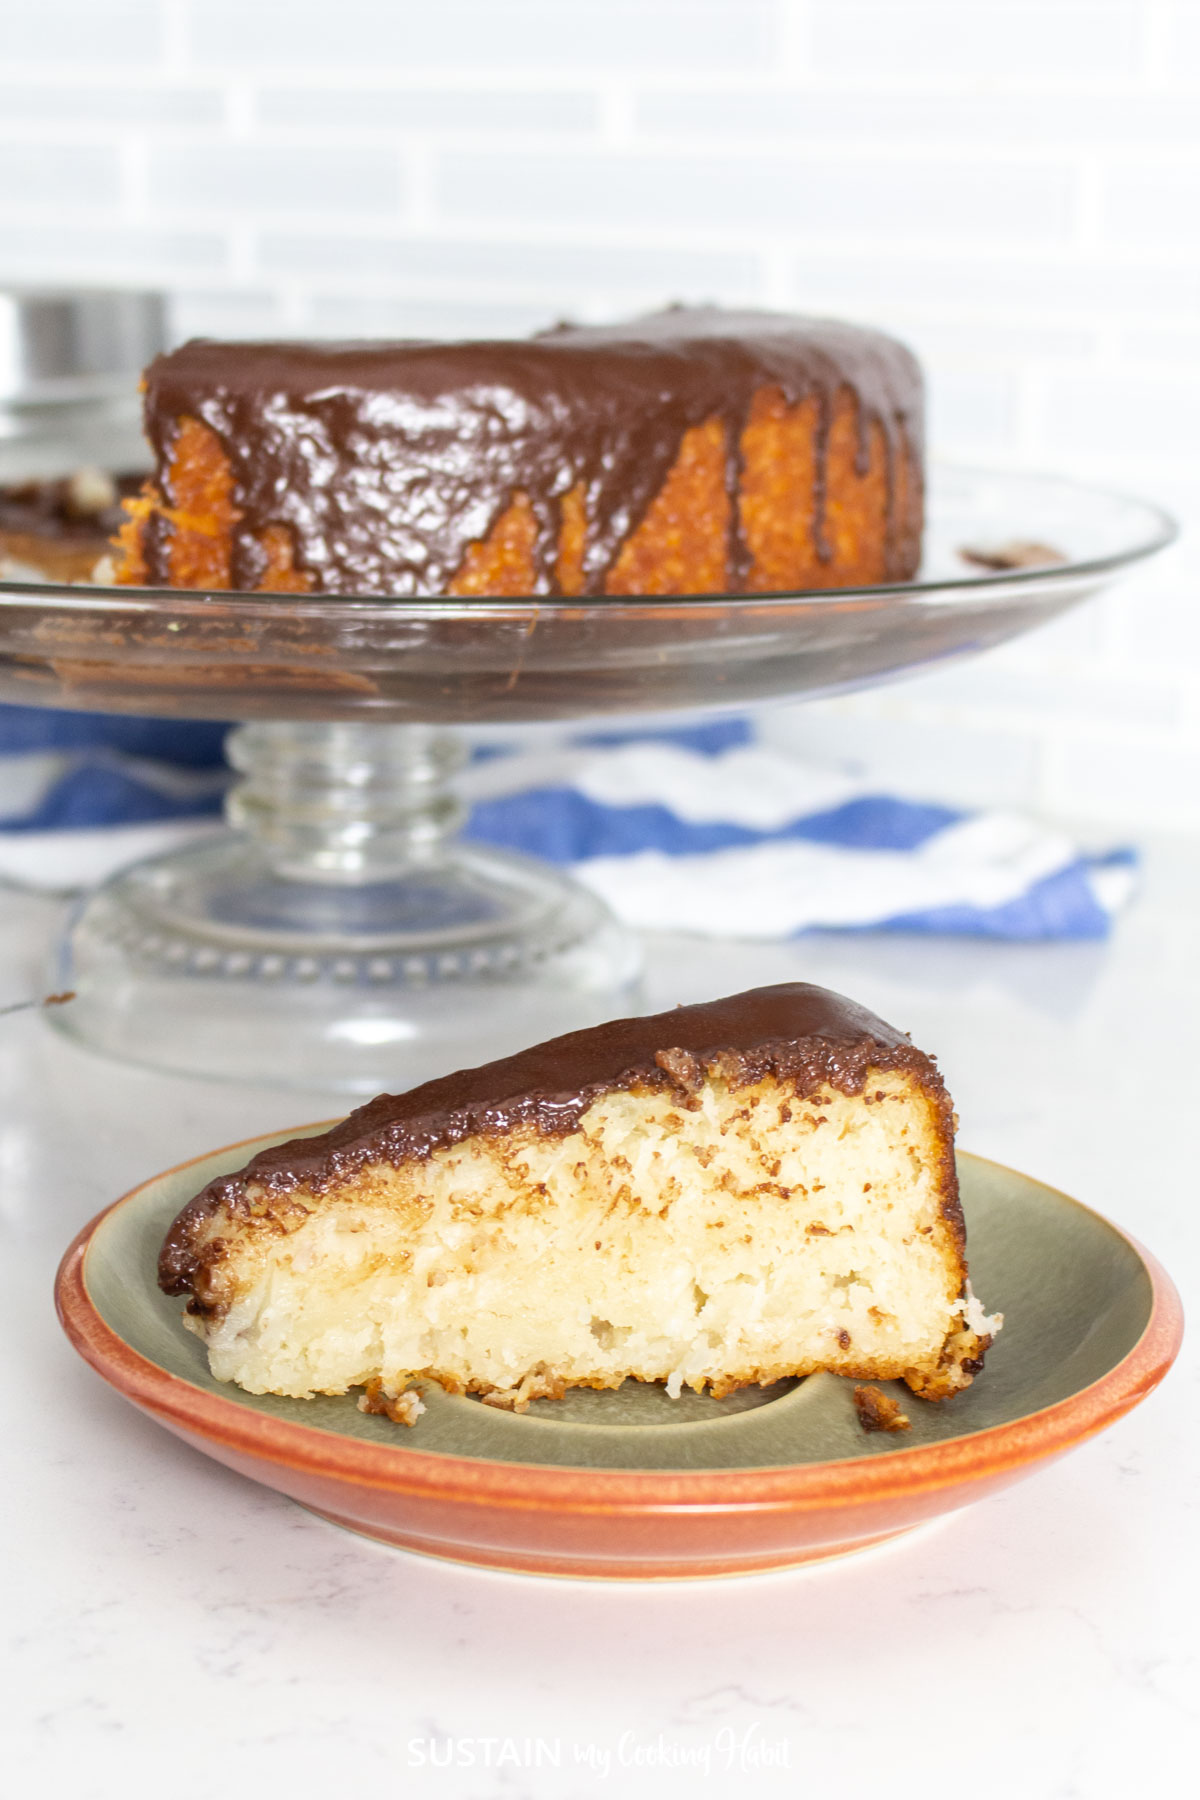 A slice of coconut cake with a chocolate glaze topping